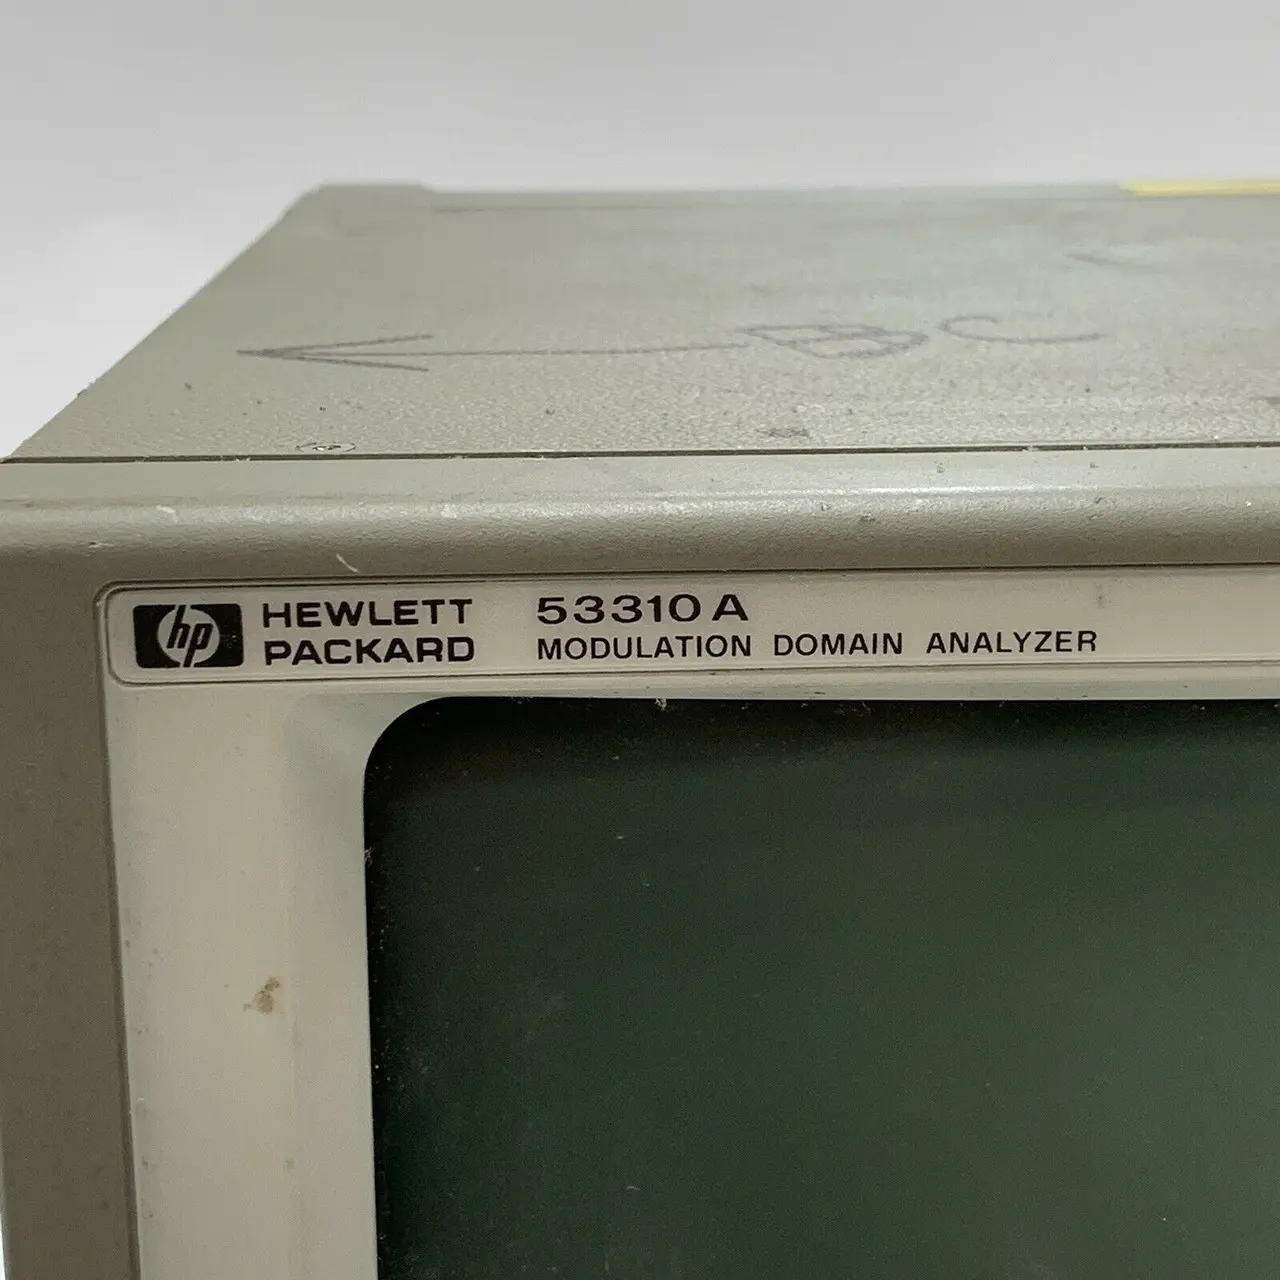 hewlett packard fm modulation monitor - What is the difference between HP 8901A and 8901b